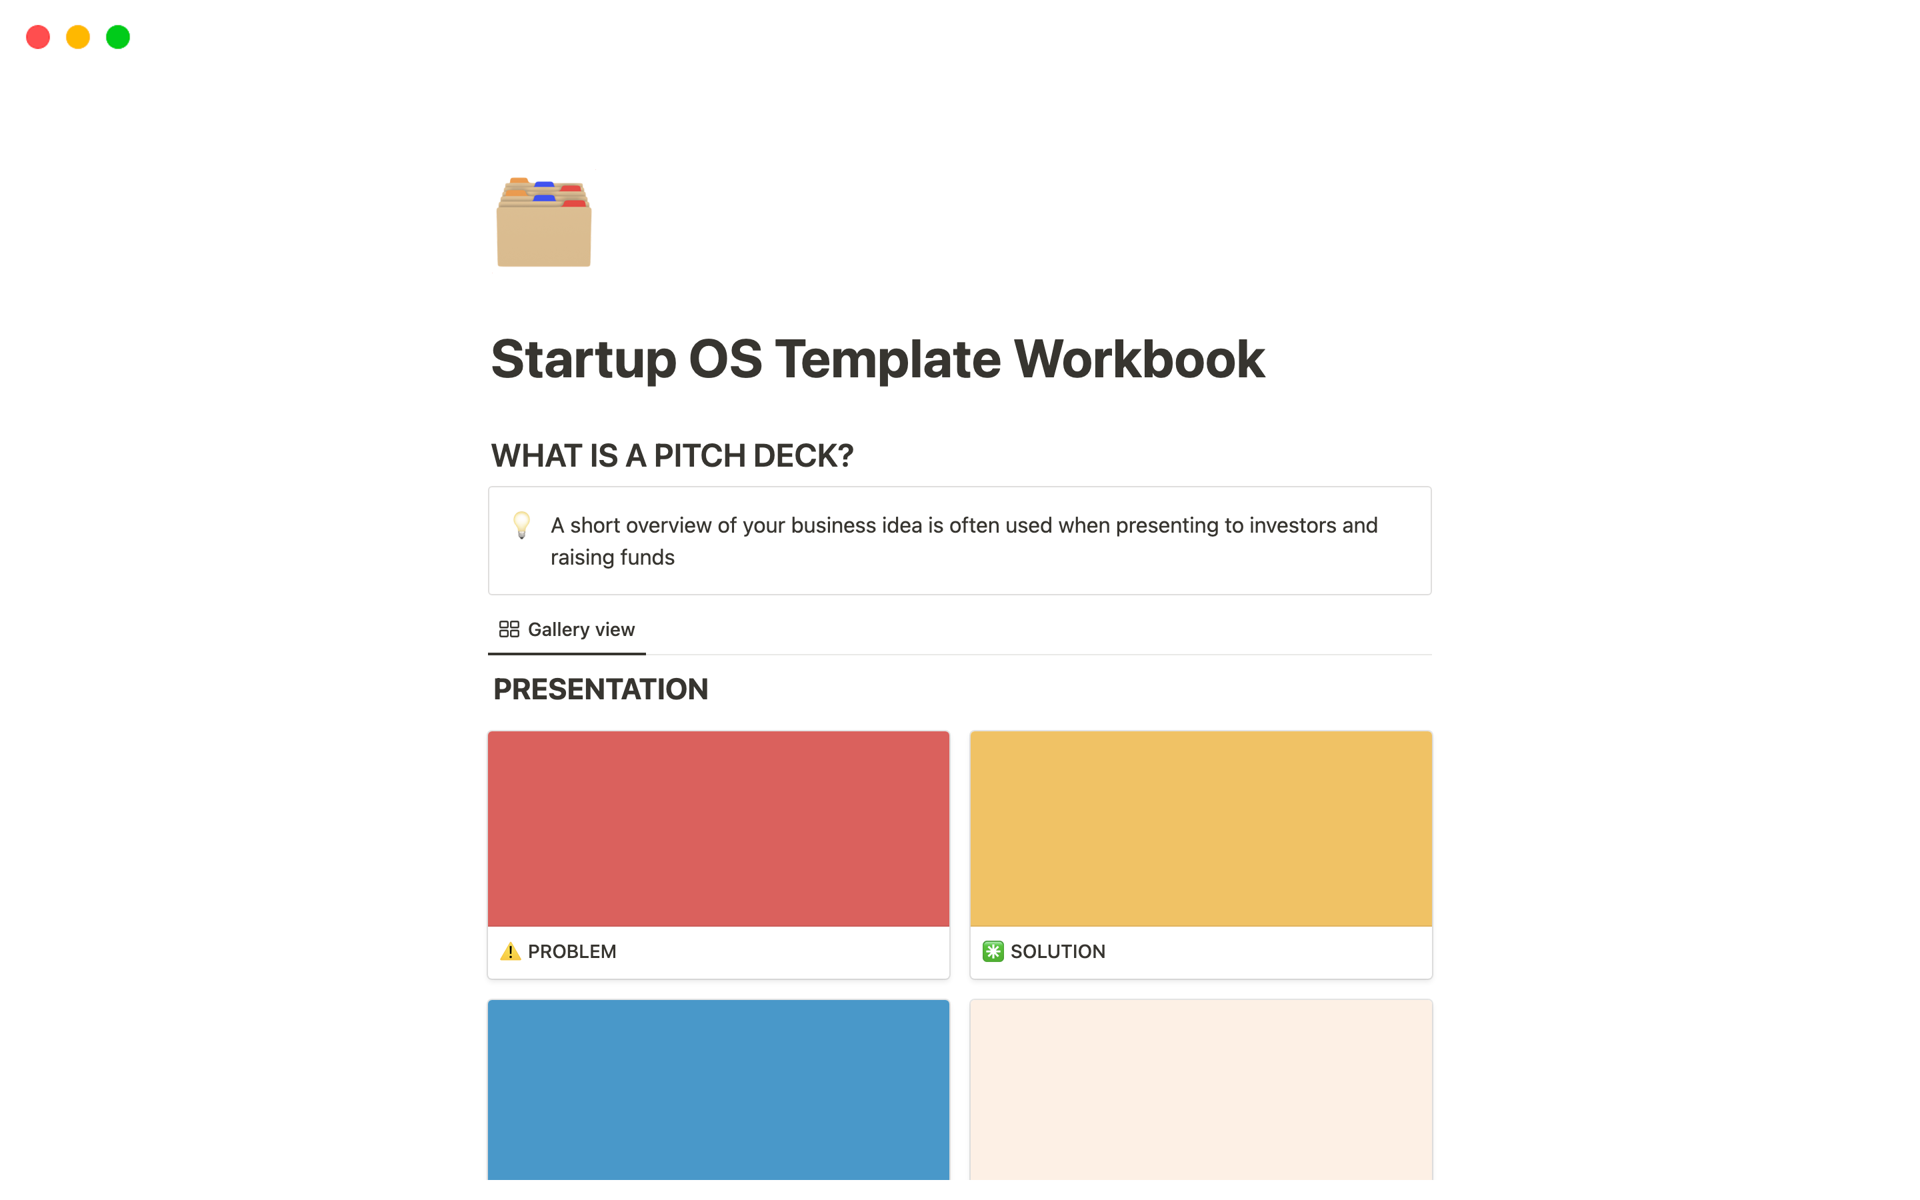 Boost your startup journey with the "Start-Up OS Template Workbook." Customize it, collaborate, and launch your entrepreneurial adventure confidently!